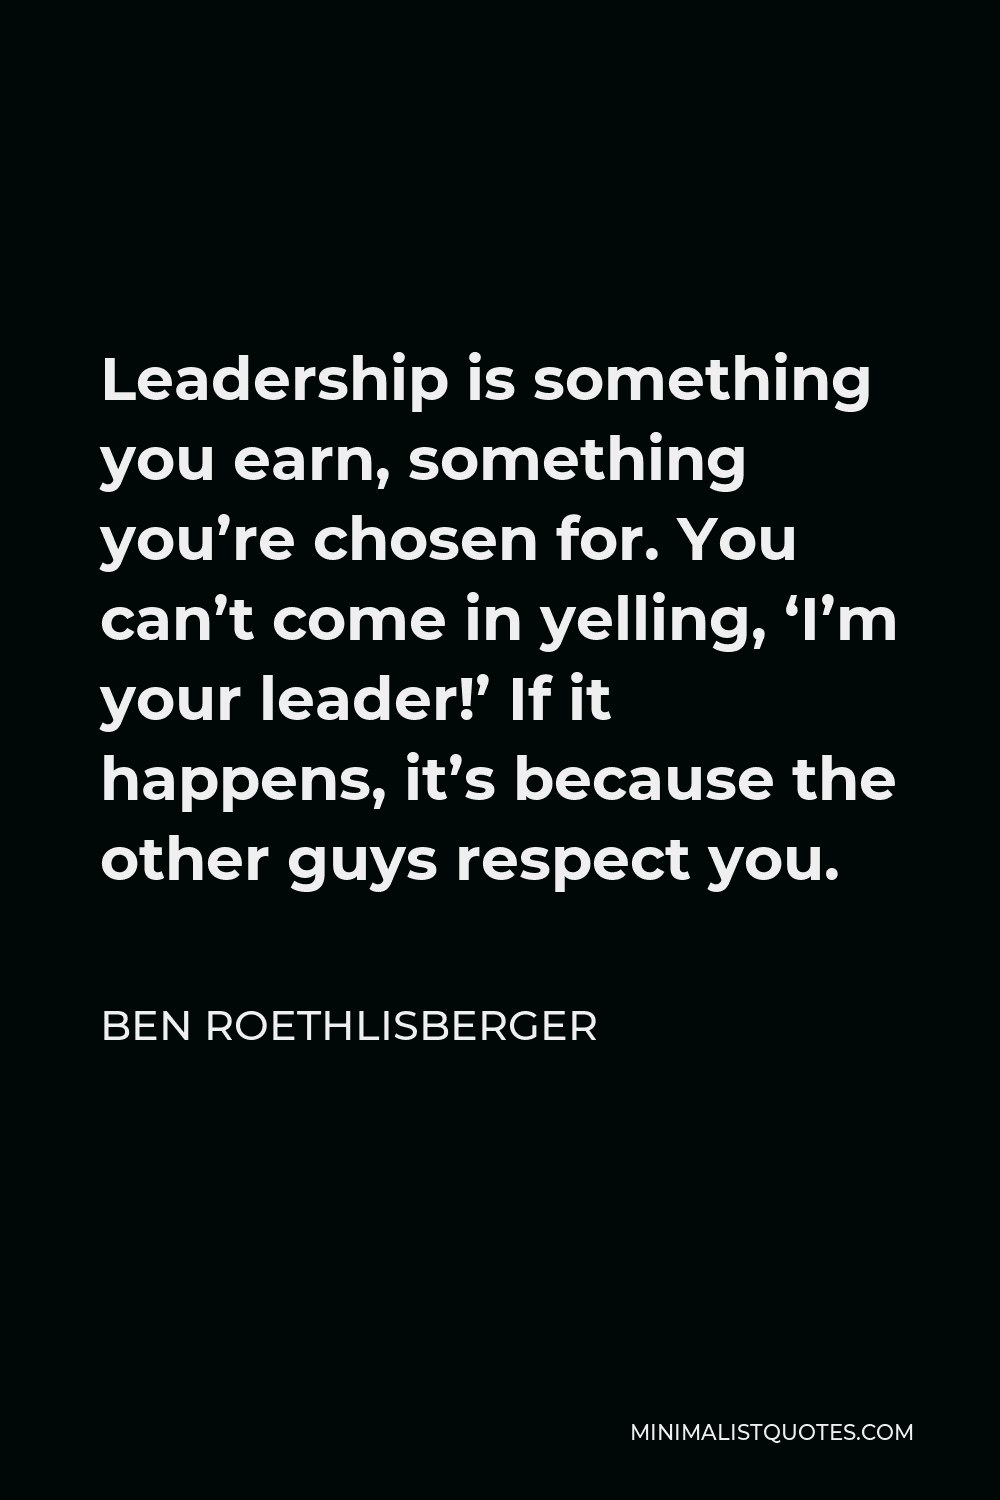 Ben Roethlisberger Quote - Leadership is something you earn, something you’re chosen for. You can’t come in yelling, ‘I’m your leader!’ If it happens, it’s because the other guys respect you.